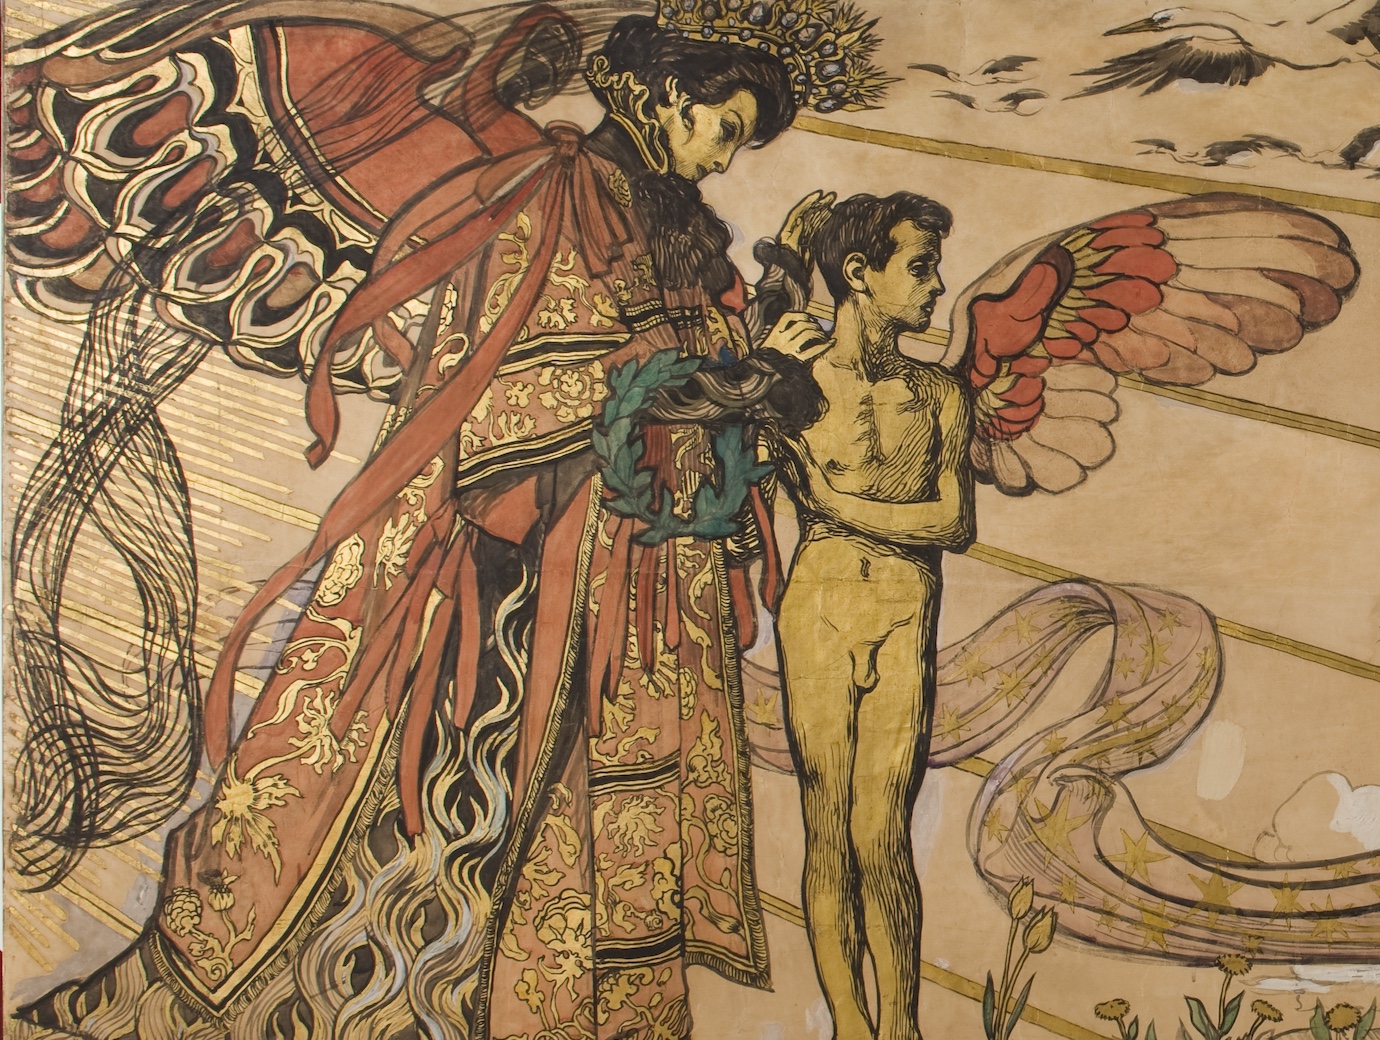 The story of Young Poland: the arts and crafts movement that championed equality and independence 